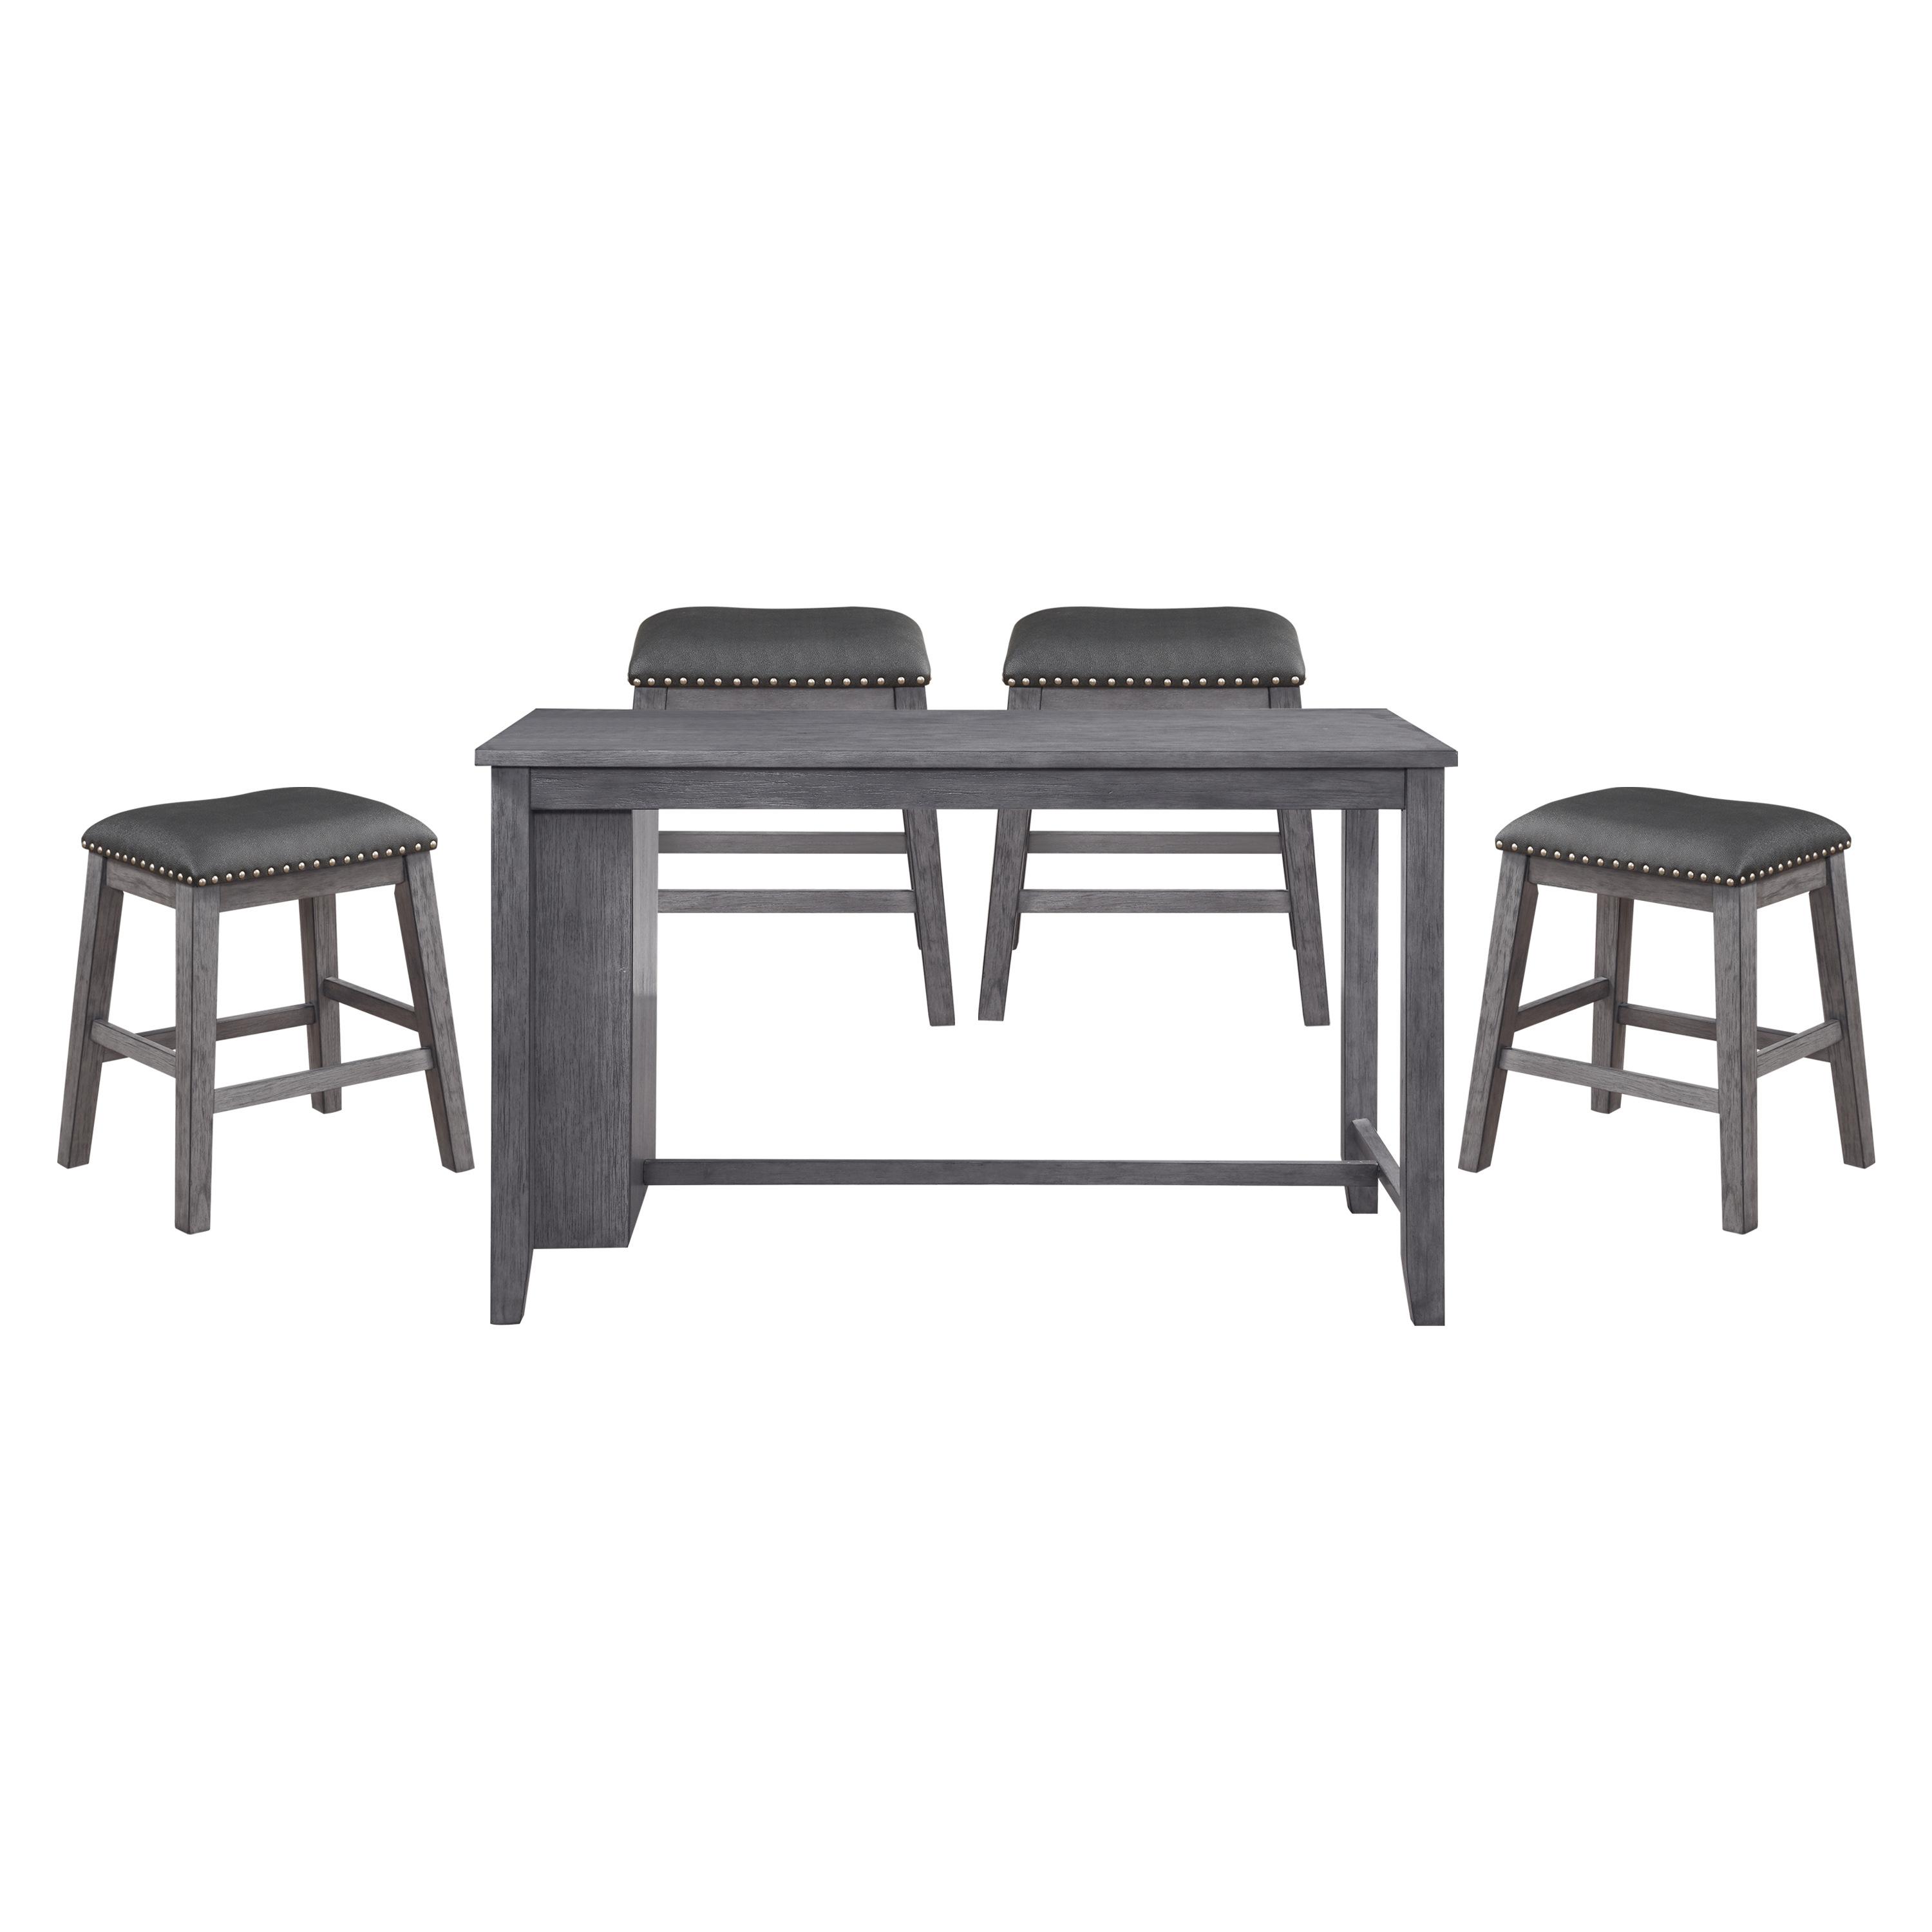 Transitional Dining Room Set 5603-36-BC*5PC Timbre 5603-36-BC*5PC in Black Faux Leather